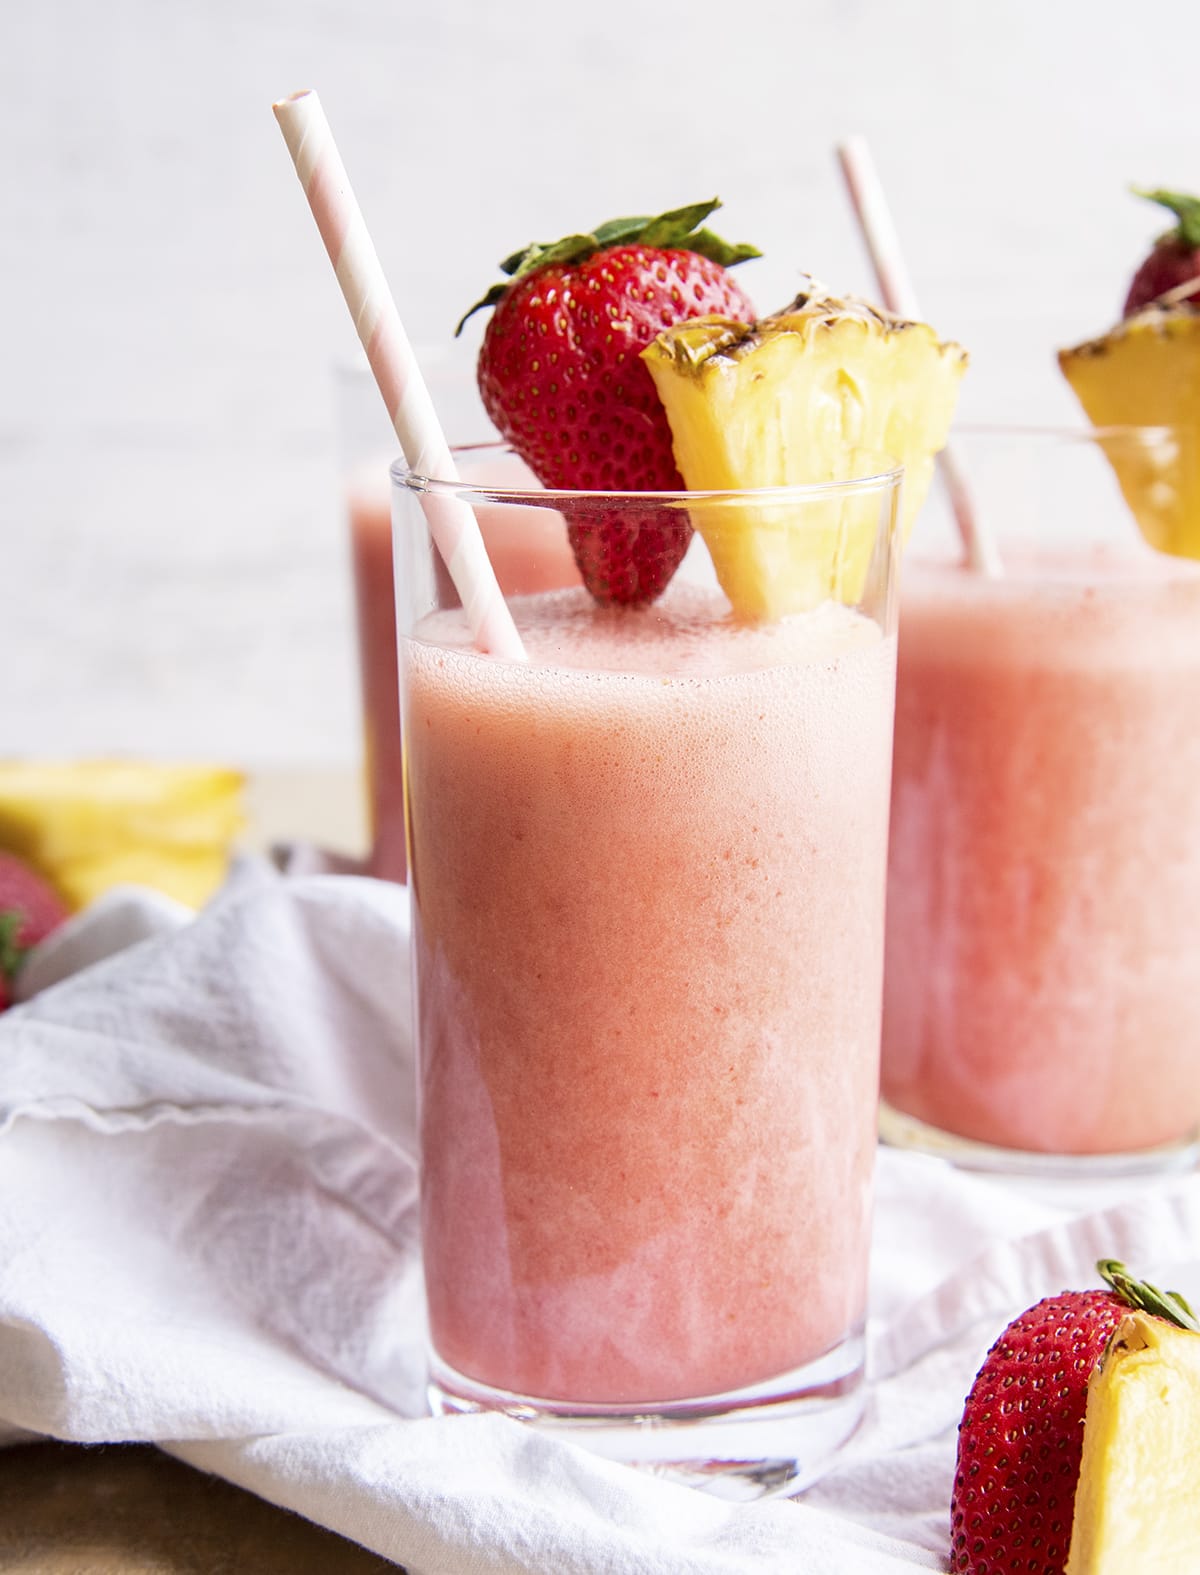 Glasses of a strawberry pina colada drink topped with a strawberry and pineapple piece.